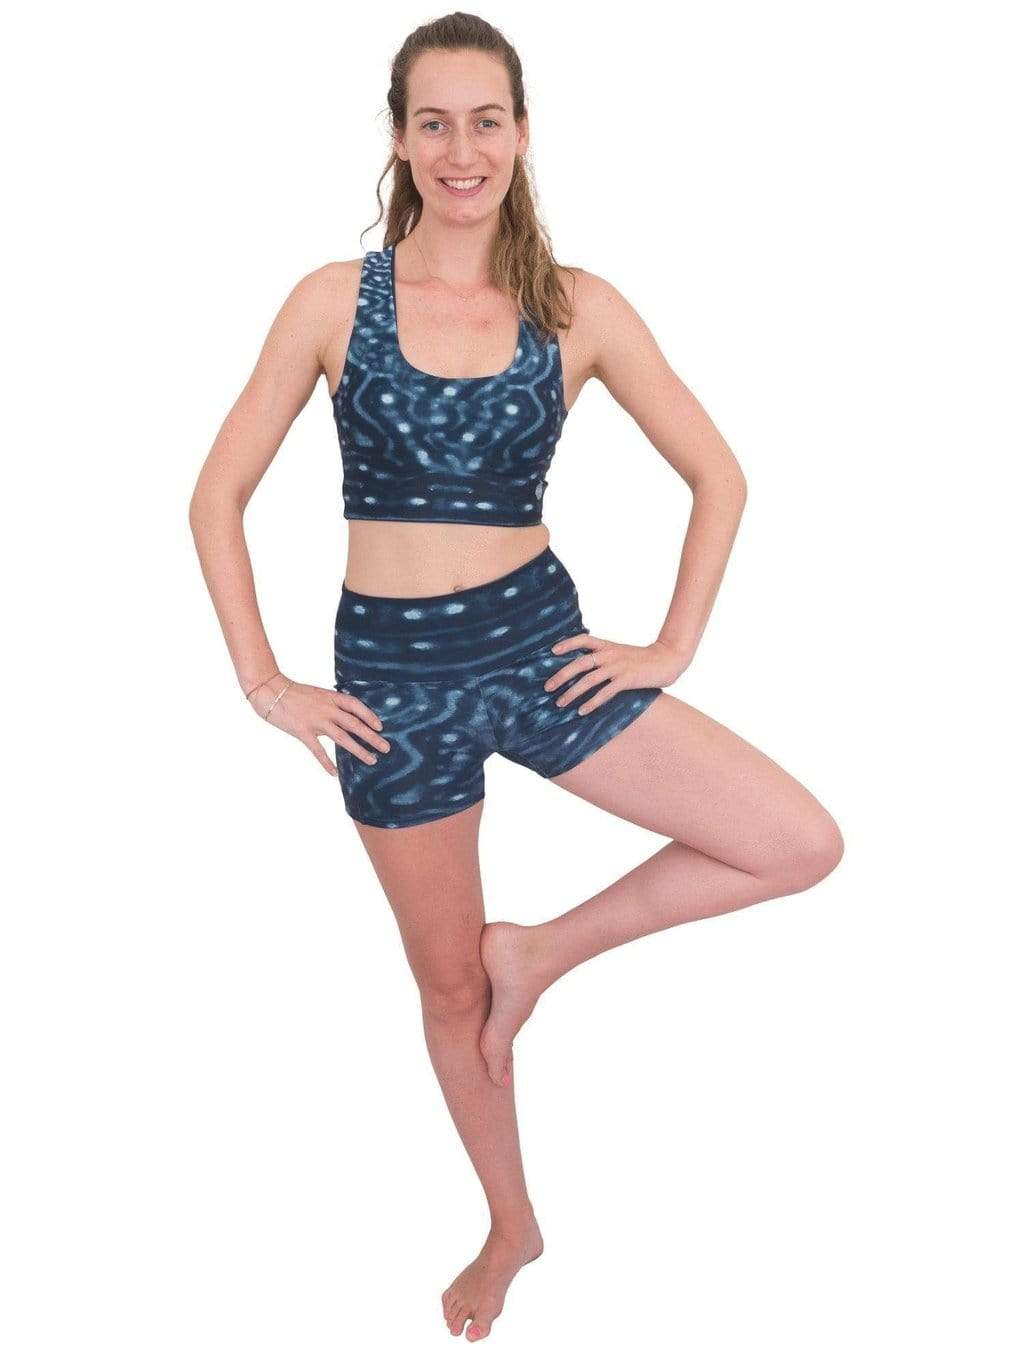 Model: Laura is our Chief Product Officer at Waterlust, a scuba diver, kiter and recreational yogi. She is 5’10, 147 lbs, 34B and is wearing a size S top and M short.